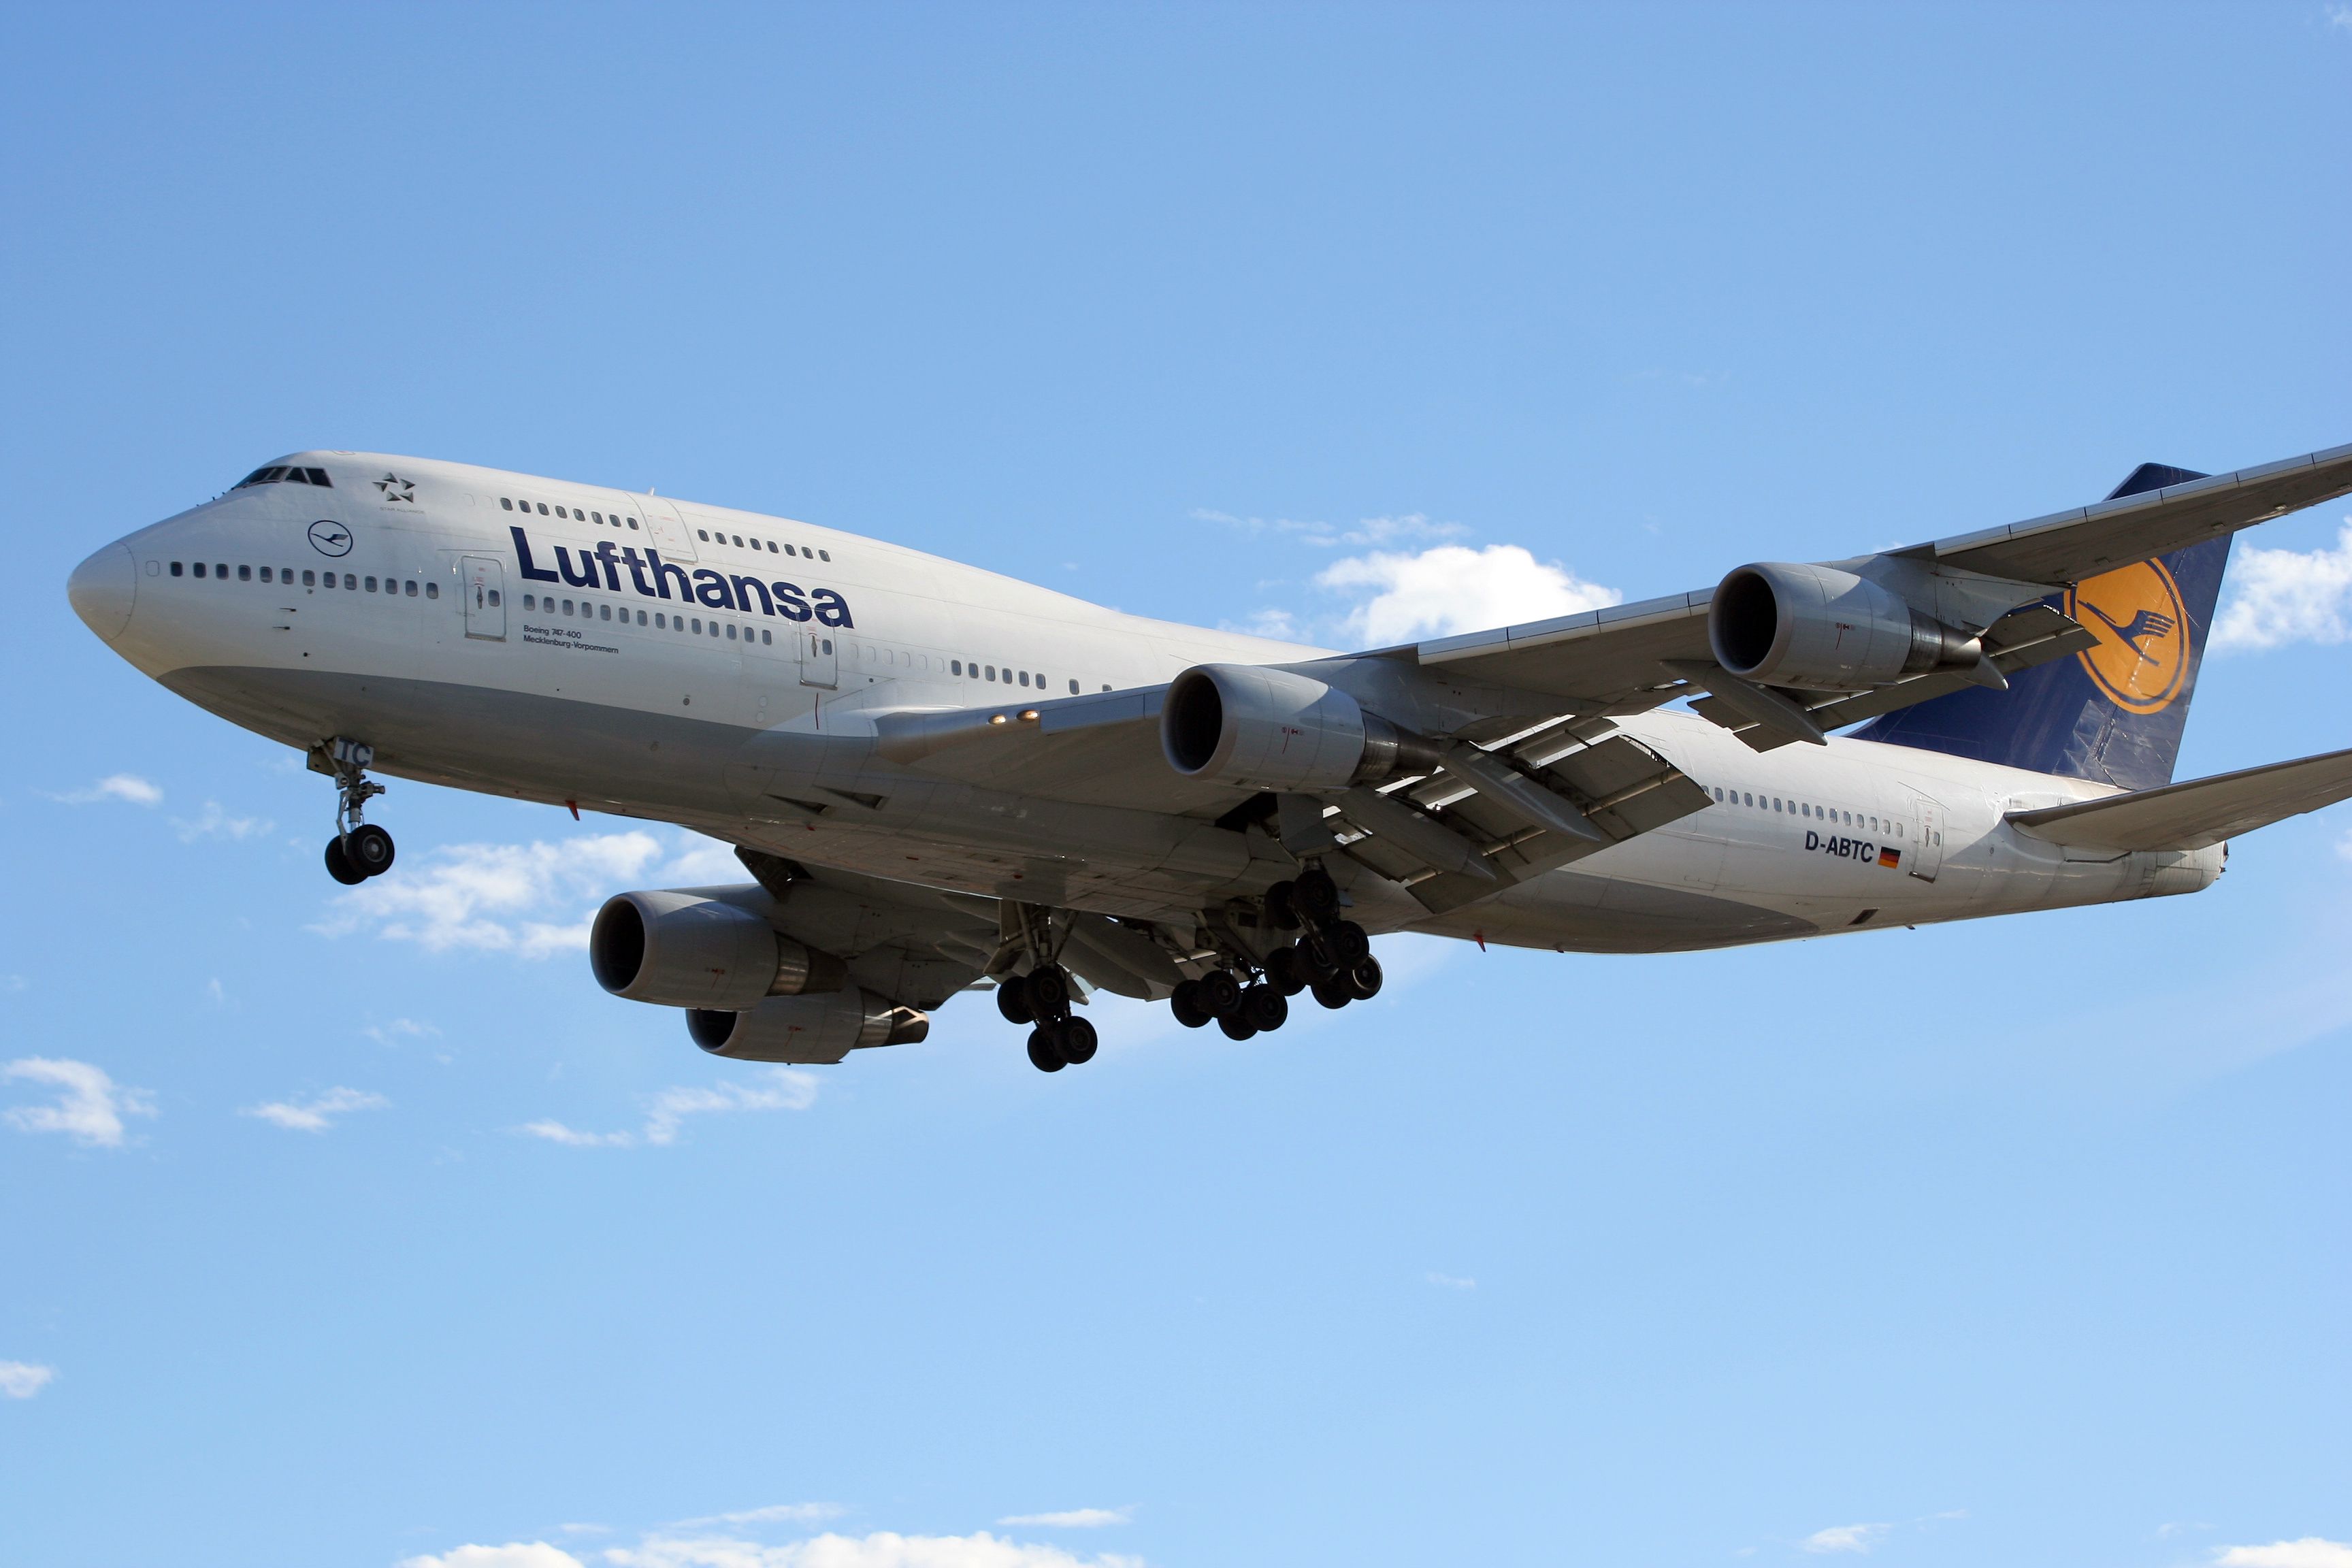 A Lufthansa Boeing 747-400 flying in the sky.